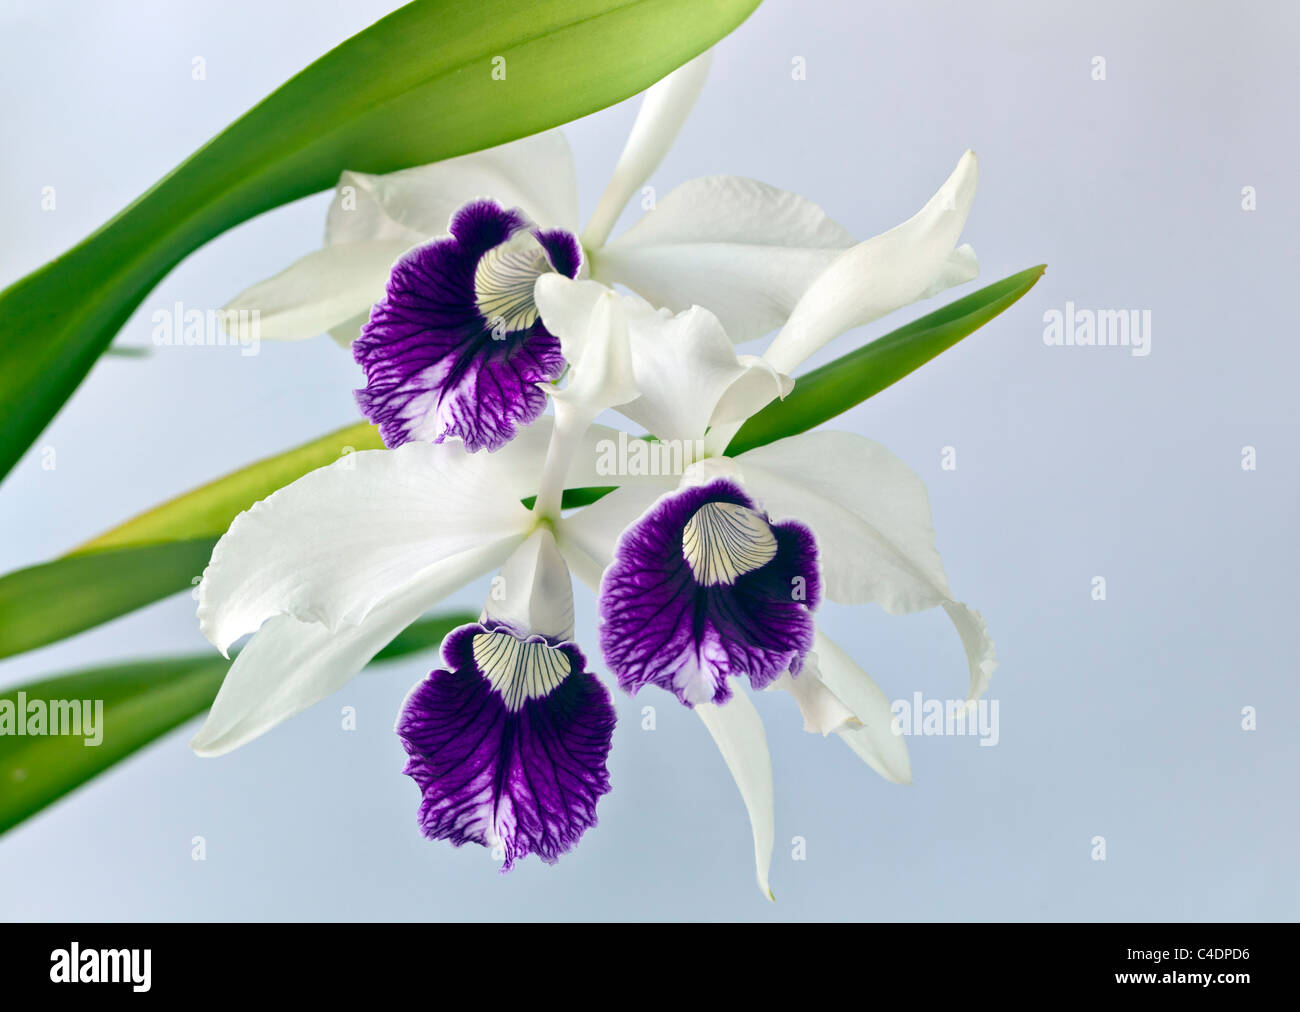 Cattleya orchid in studio setting with white background Stock Photo